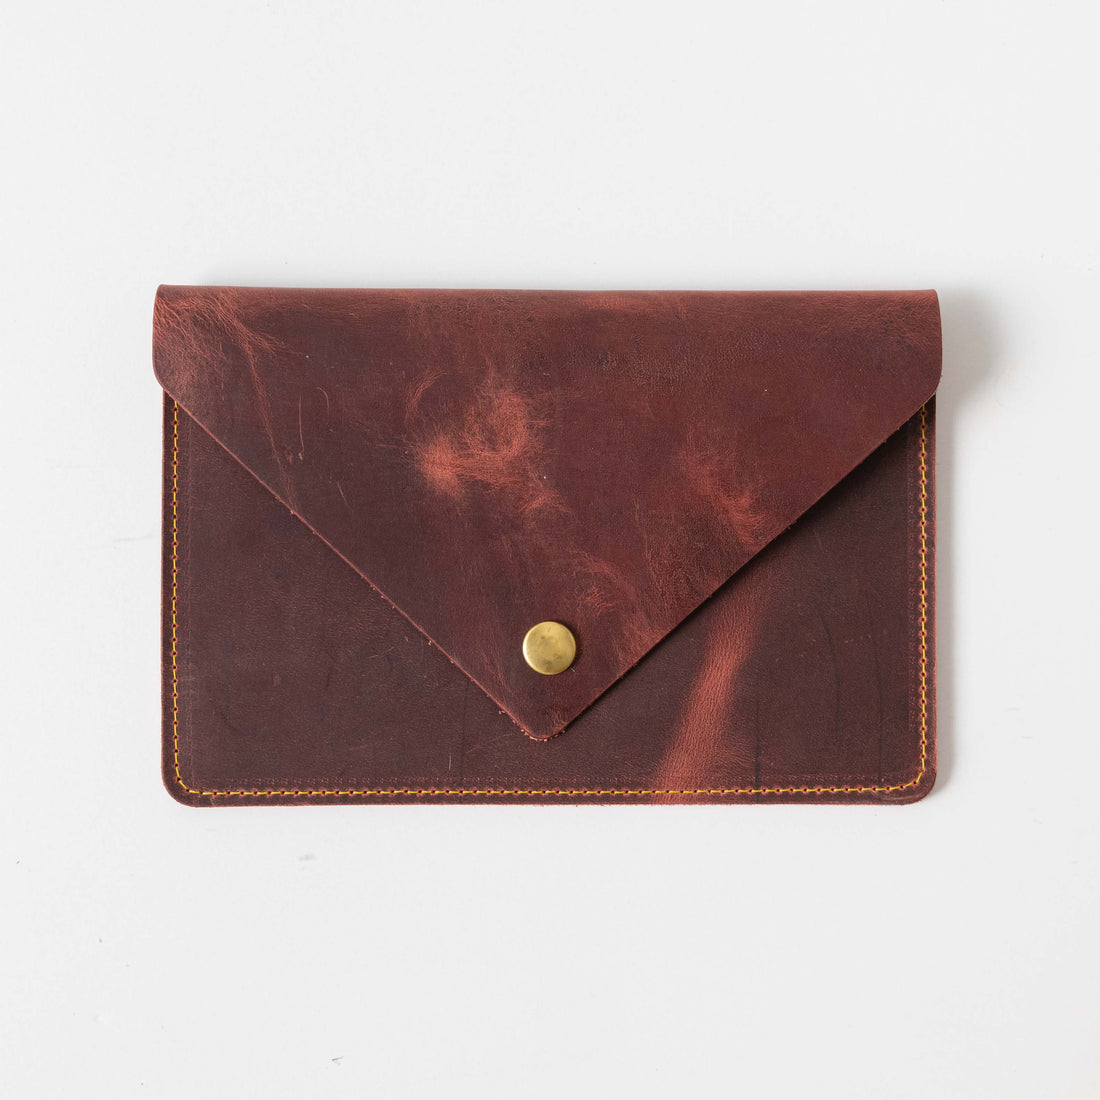 Mulberry Leather Clutch